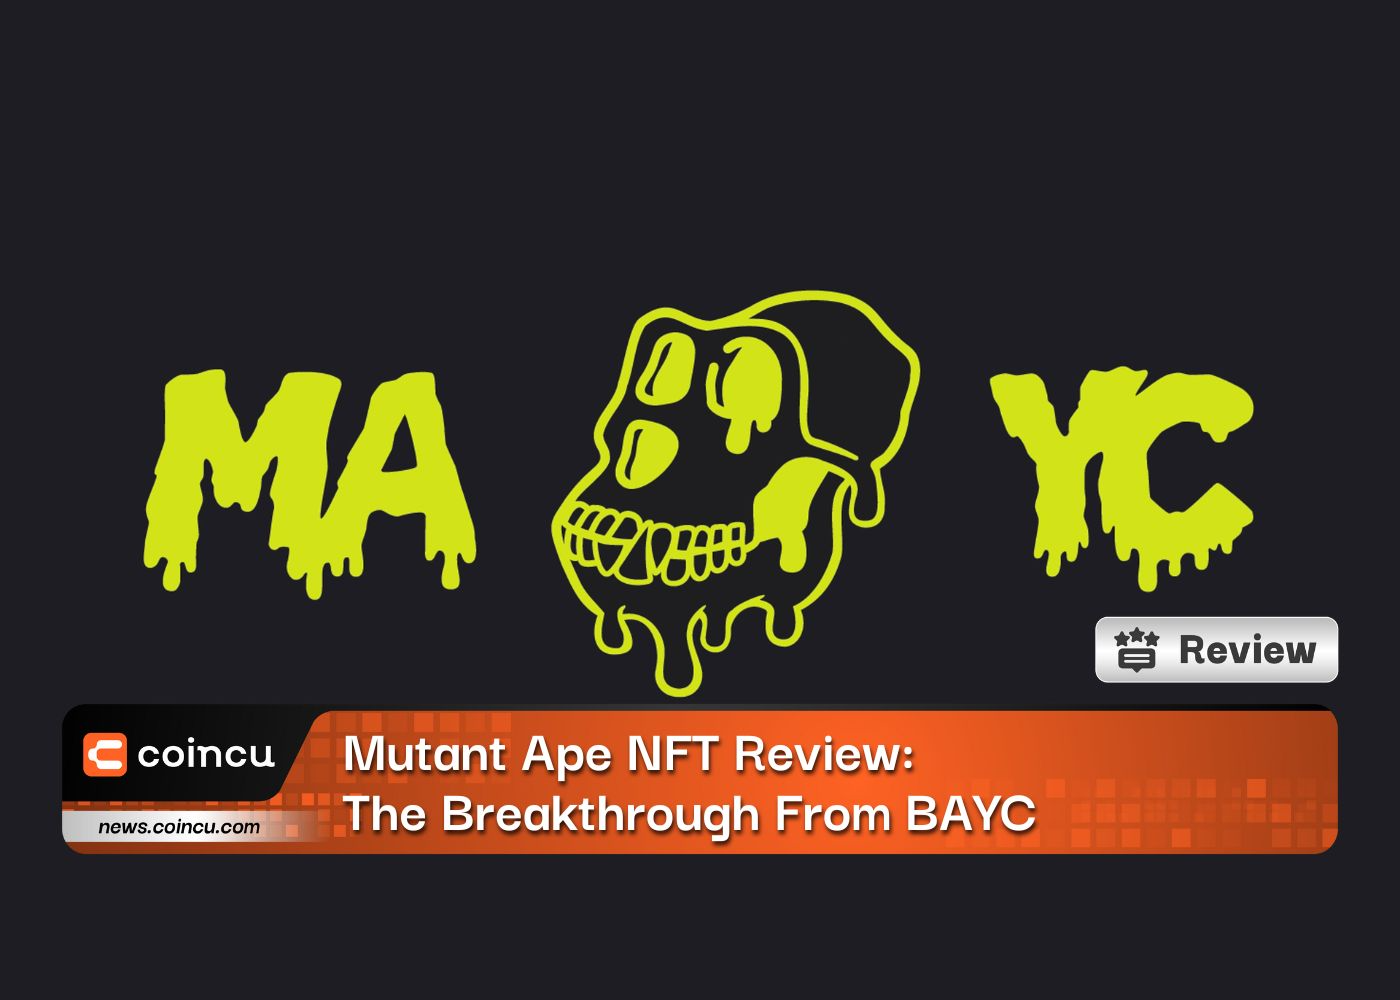 Mutant Ape NFT Review: The Breakthrough From BAYC